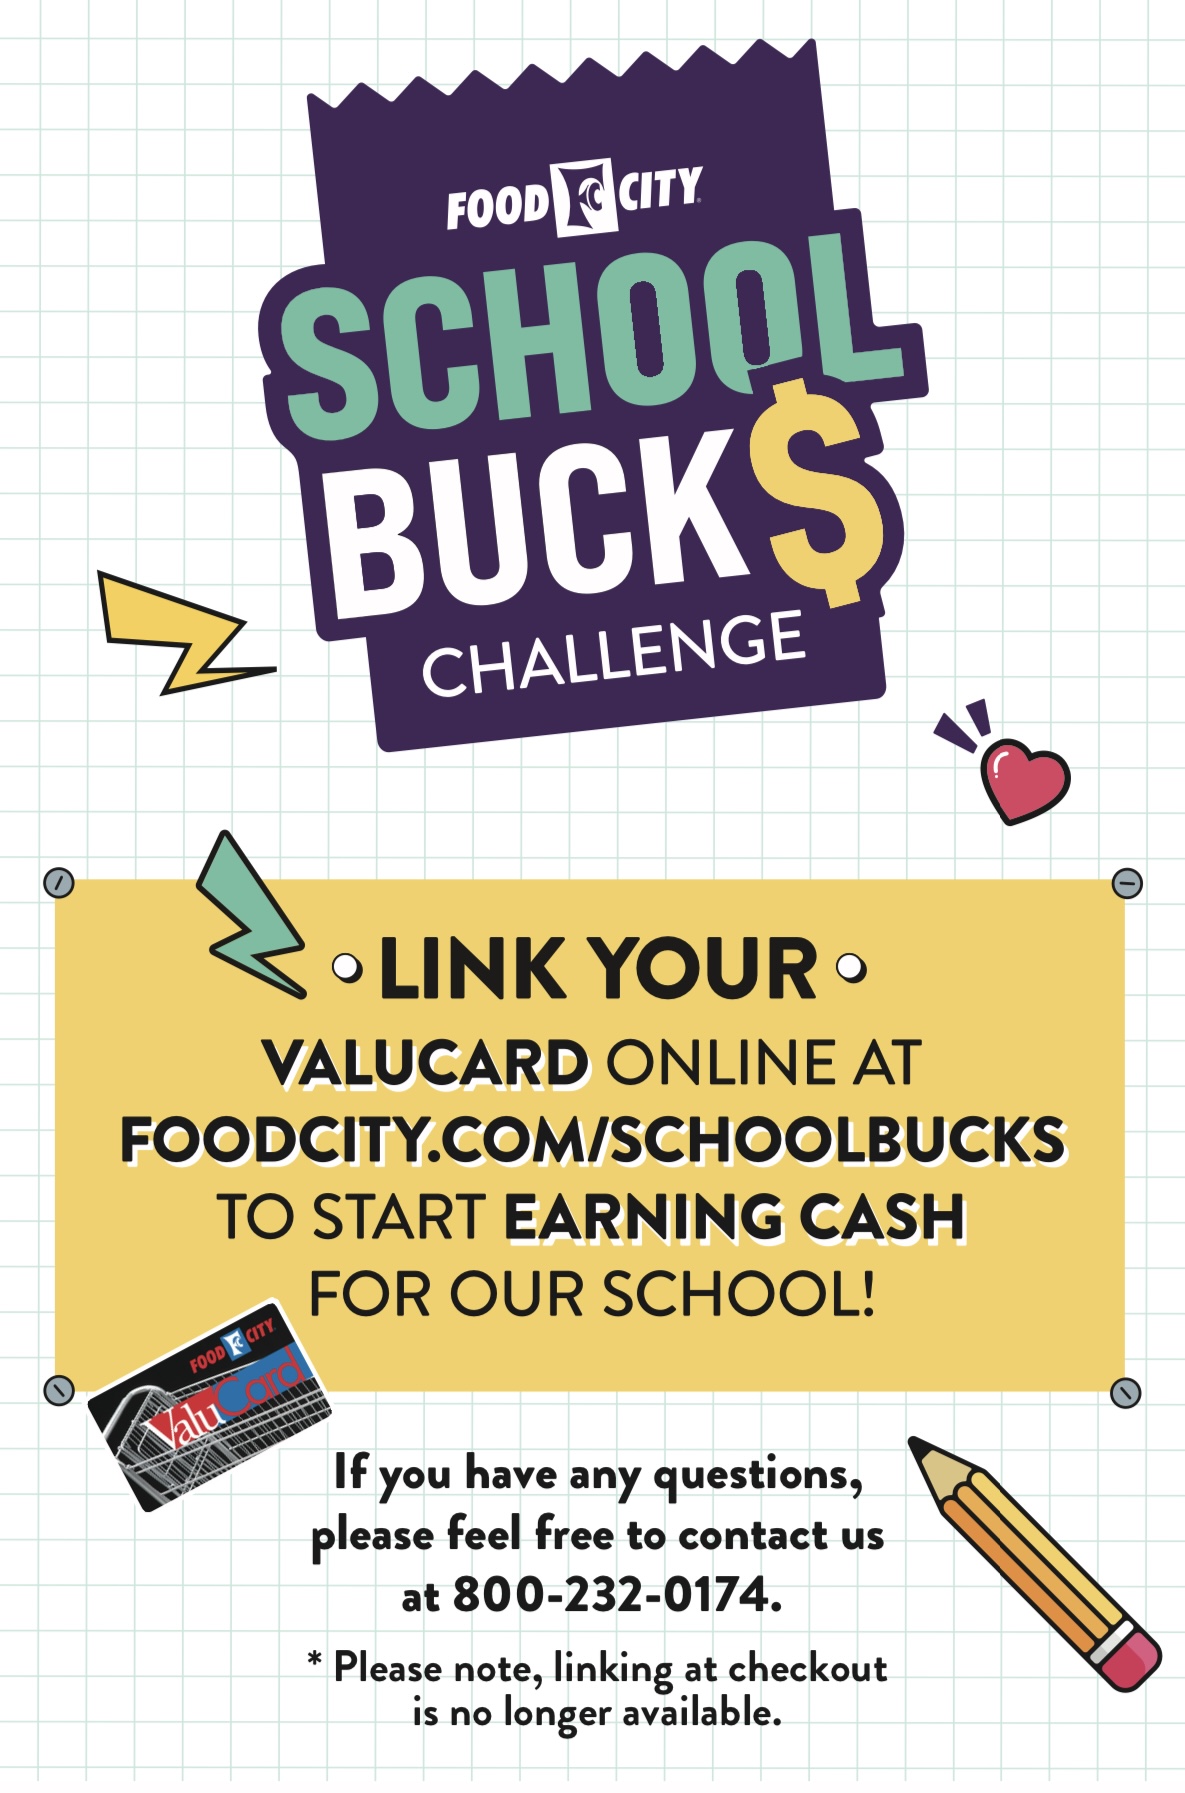 Food City School Bucks Click here to learn how to link your food city card to Broadview and earn us money to spend on school supplies while you shop. You must renew your link to Broadview every year. Thank you for your support.